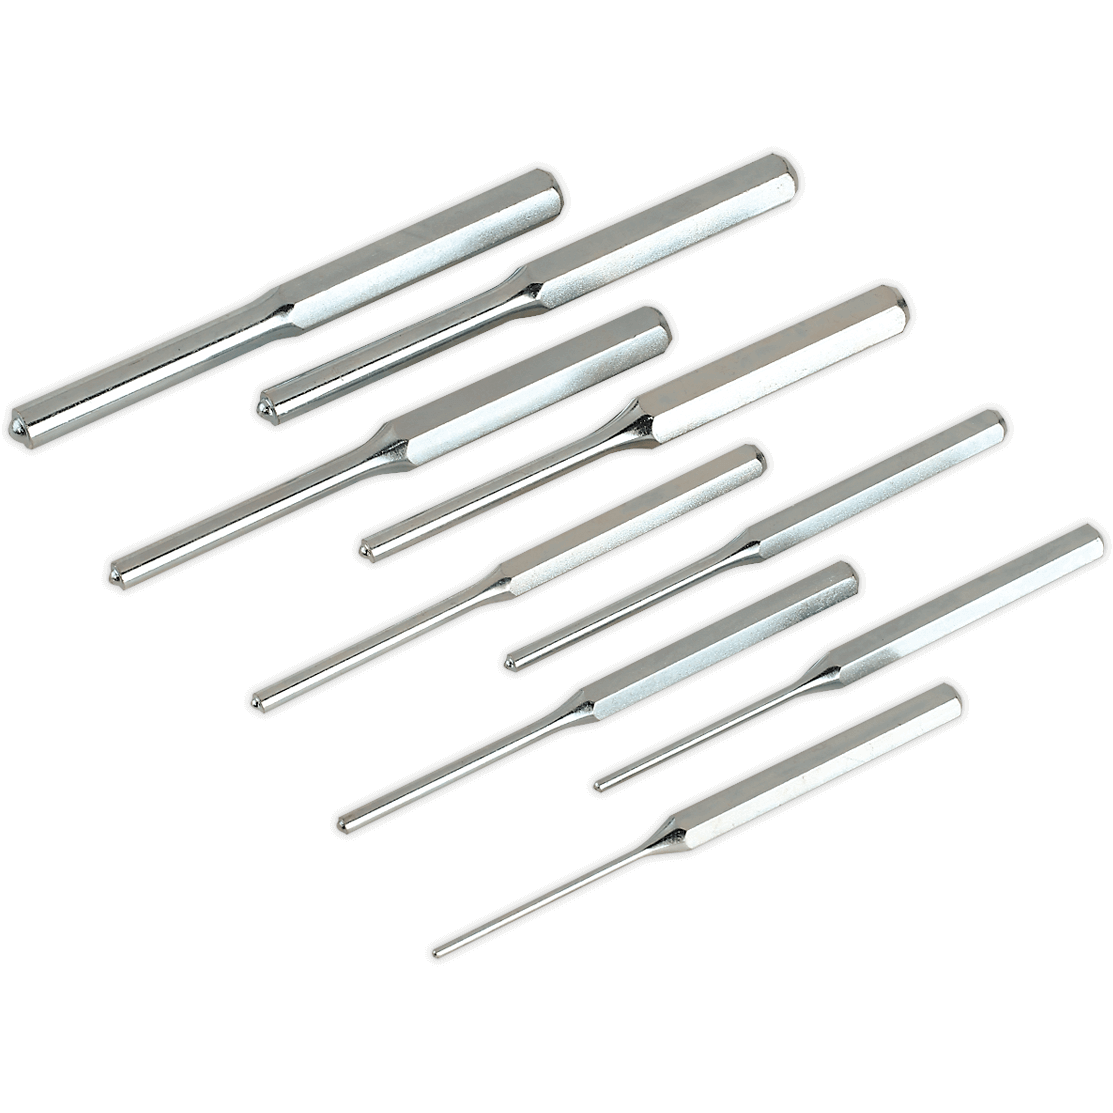 Sealey 9 Piece Roll Pin Punch Set Metric